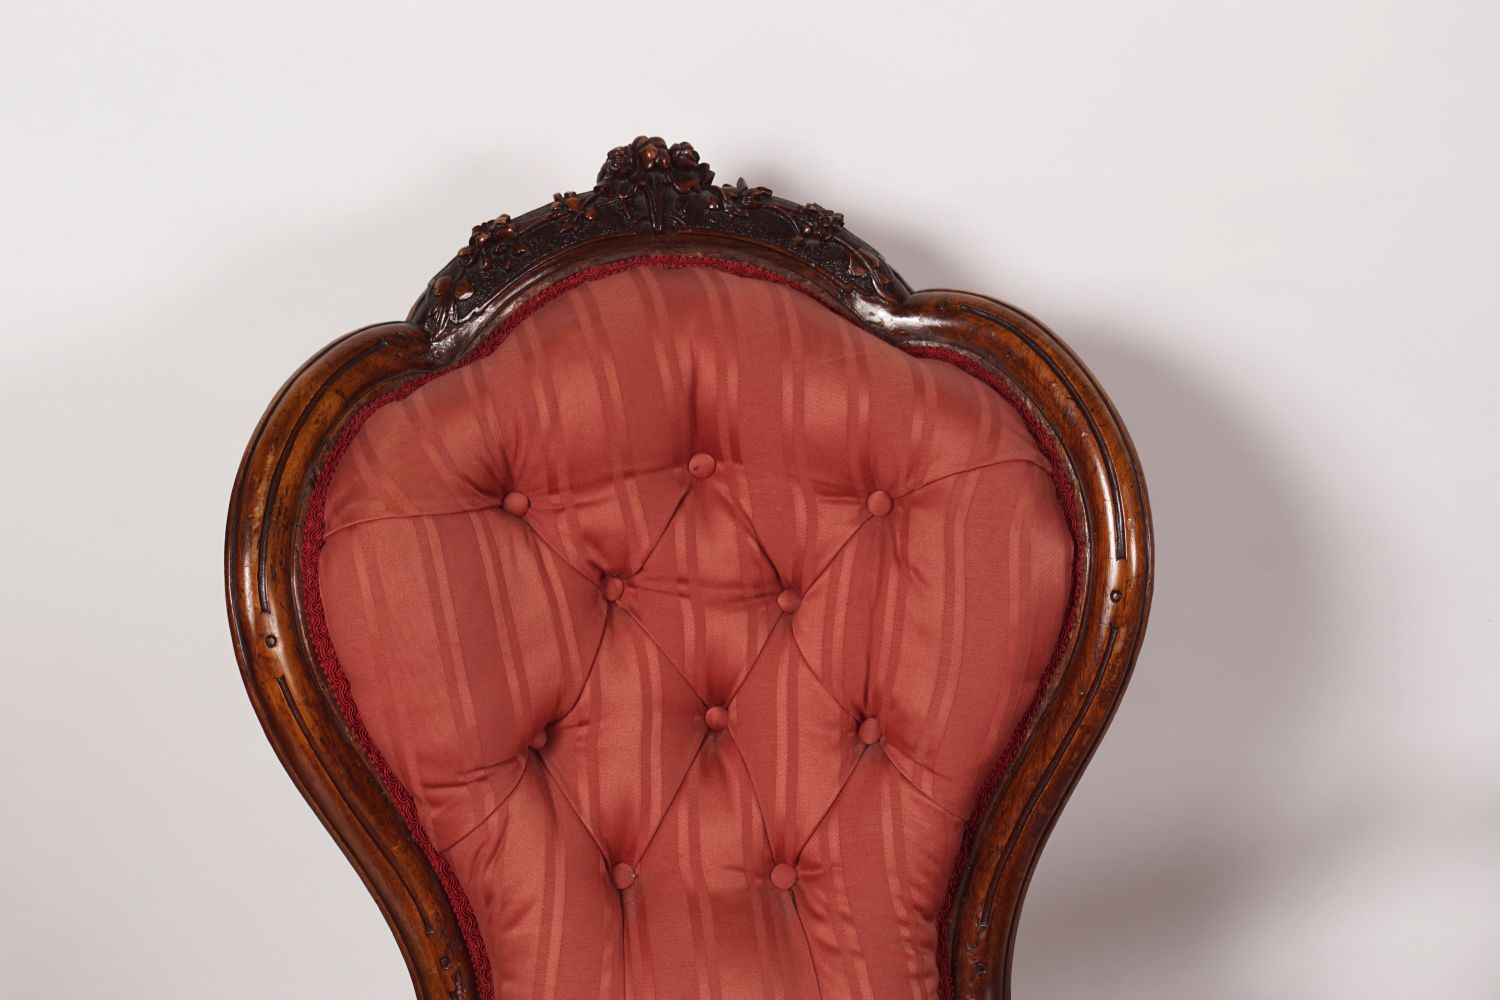 MATCHED PAIR OF WILLIAM IV MAHOGANY HALL CHAIRS - Image 3 of 3